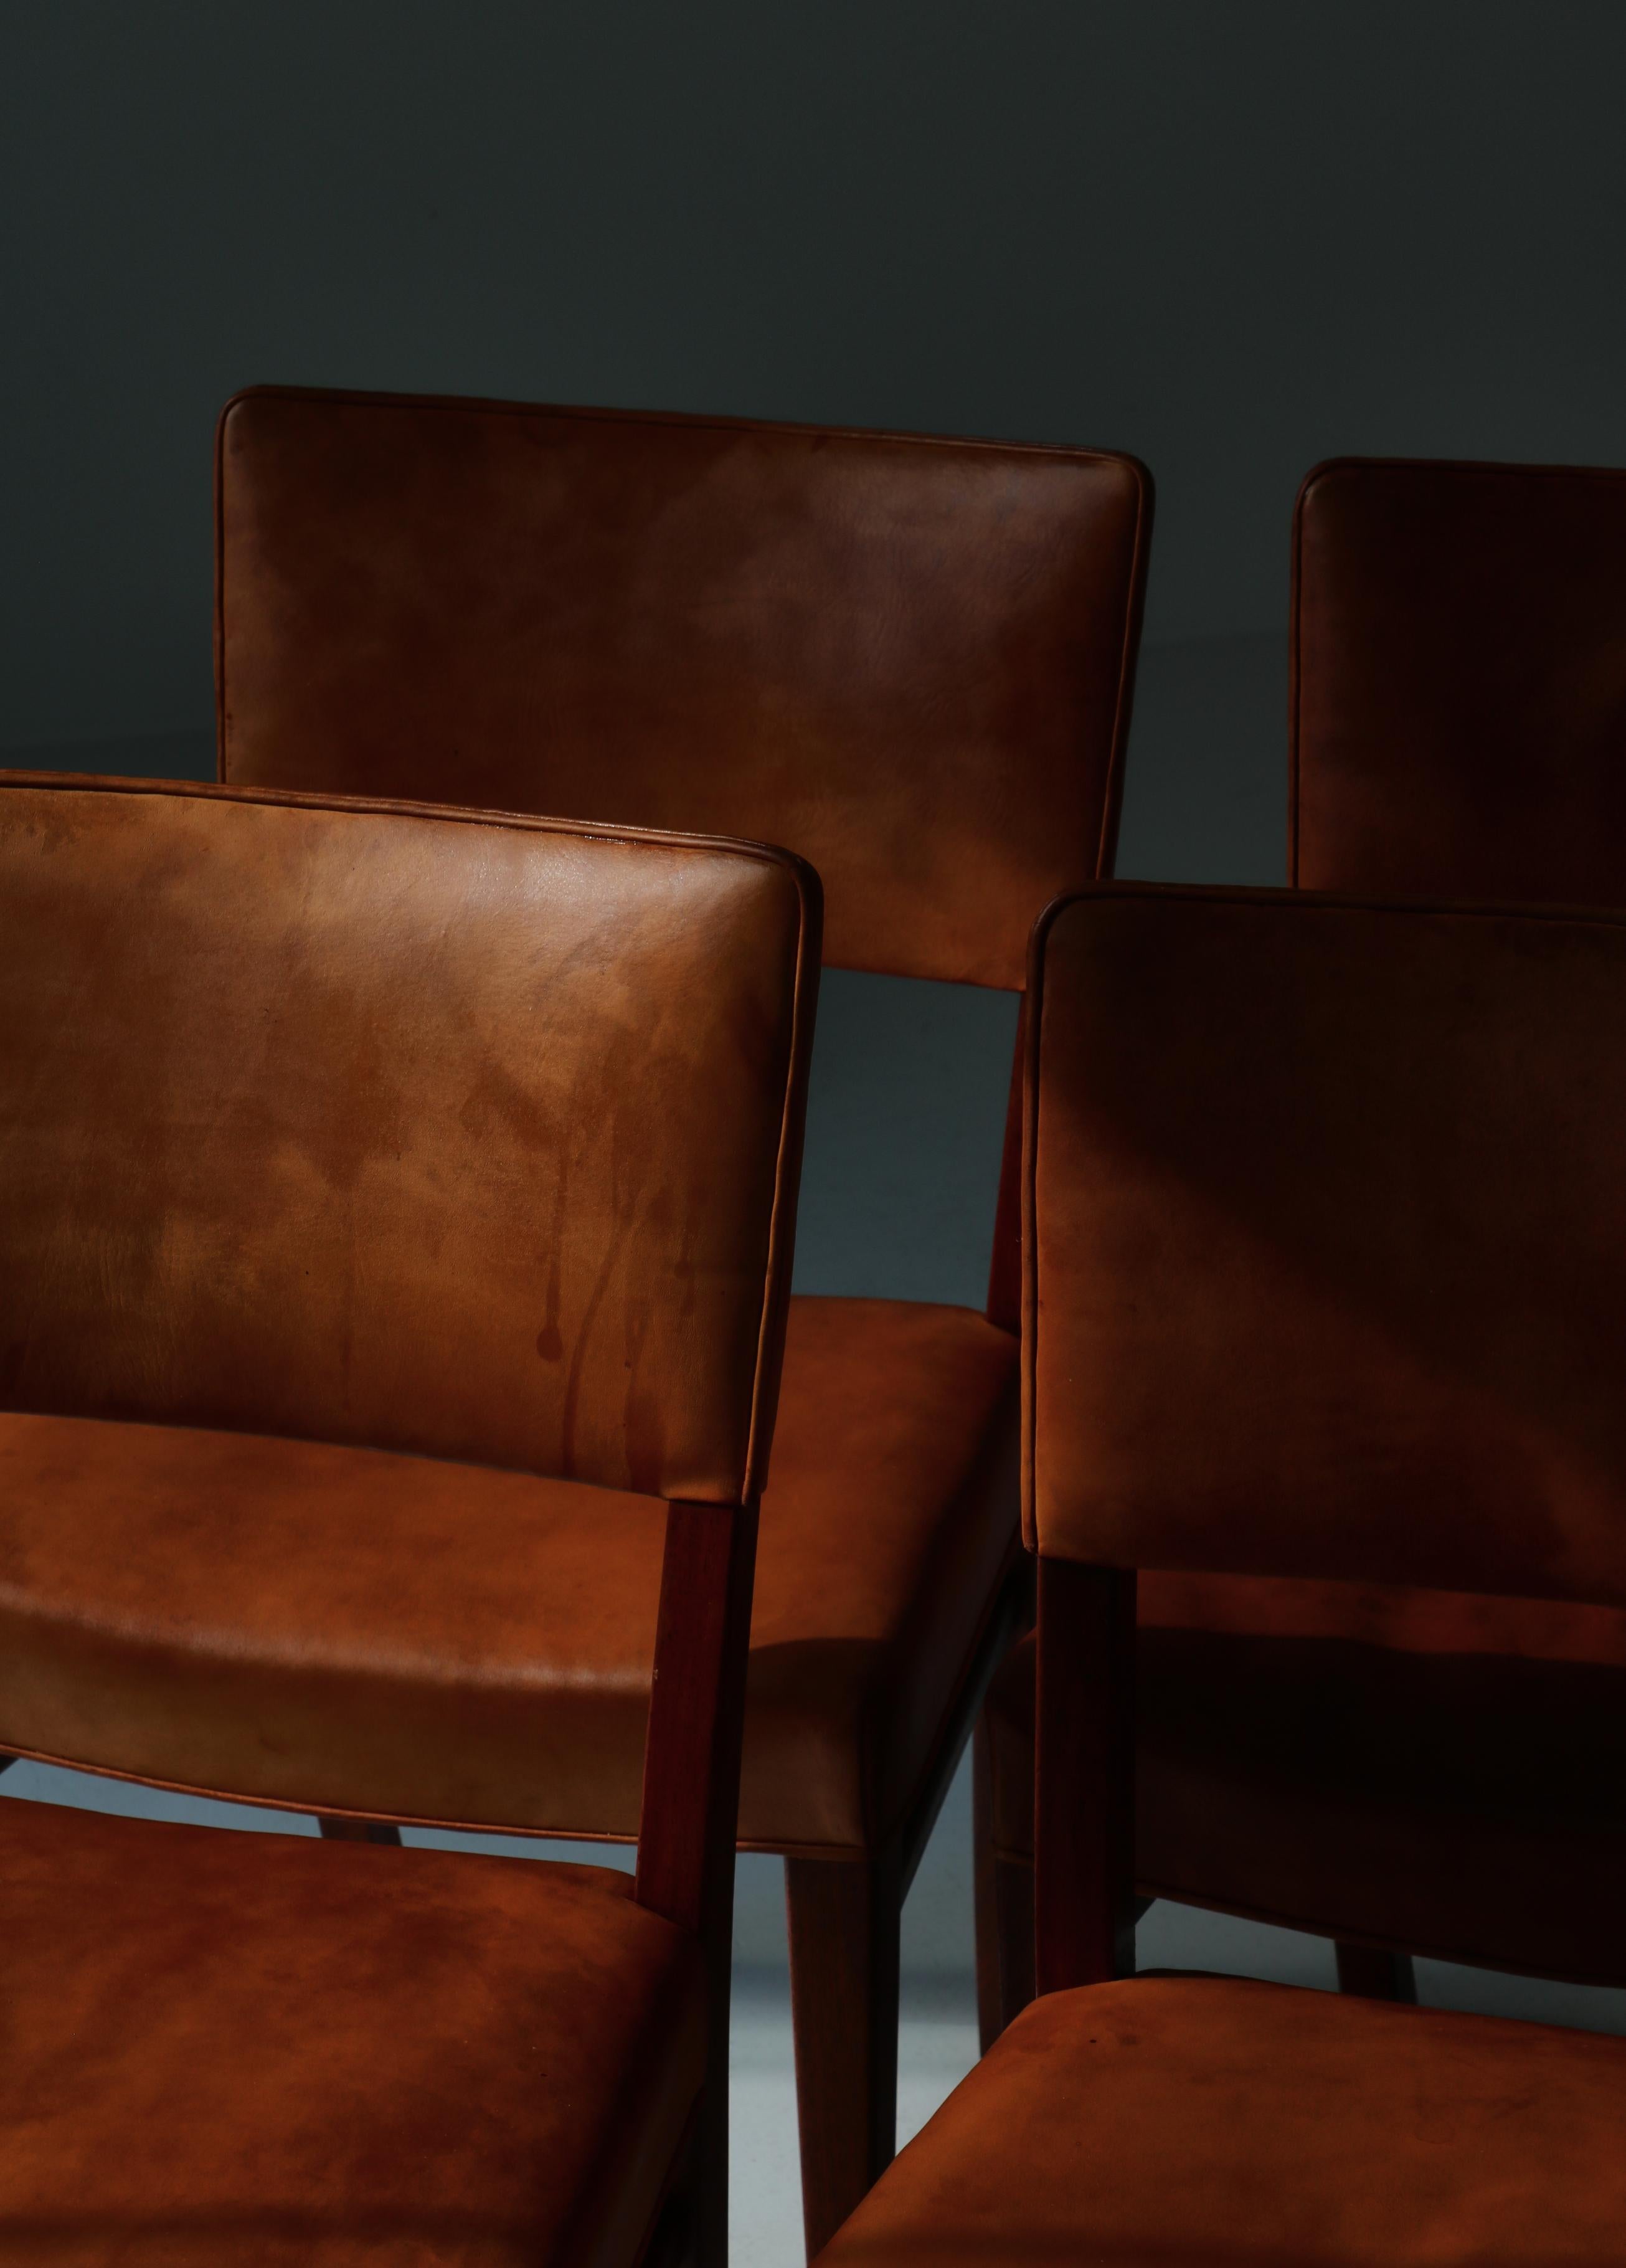 Set of 6 dining chairs by Ernst Kühn made in the 1940s for Lysberg, Hansen & Therp, Copenhagen. Amazingly the chairs all retain the original natural aniline leather that has aged beautifully with a deep and warm patina. Both seats and backs were